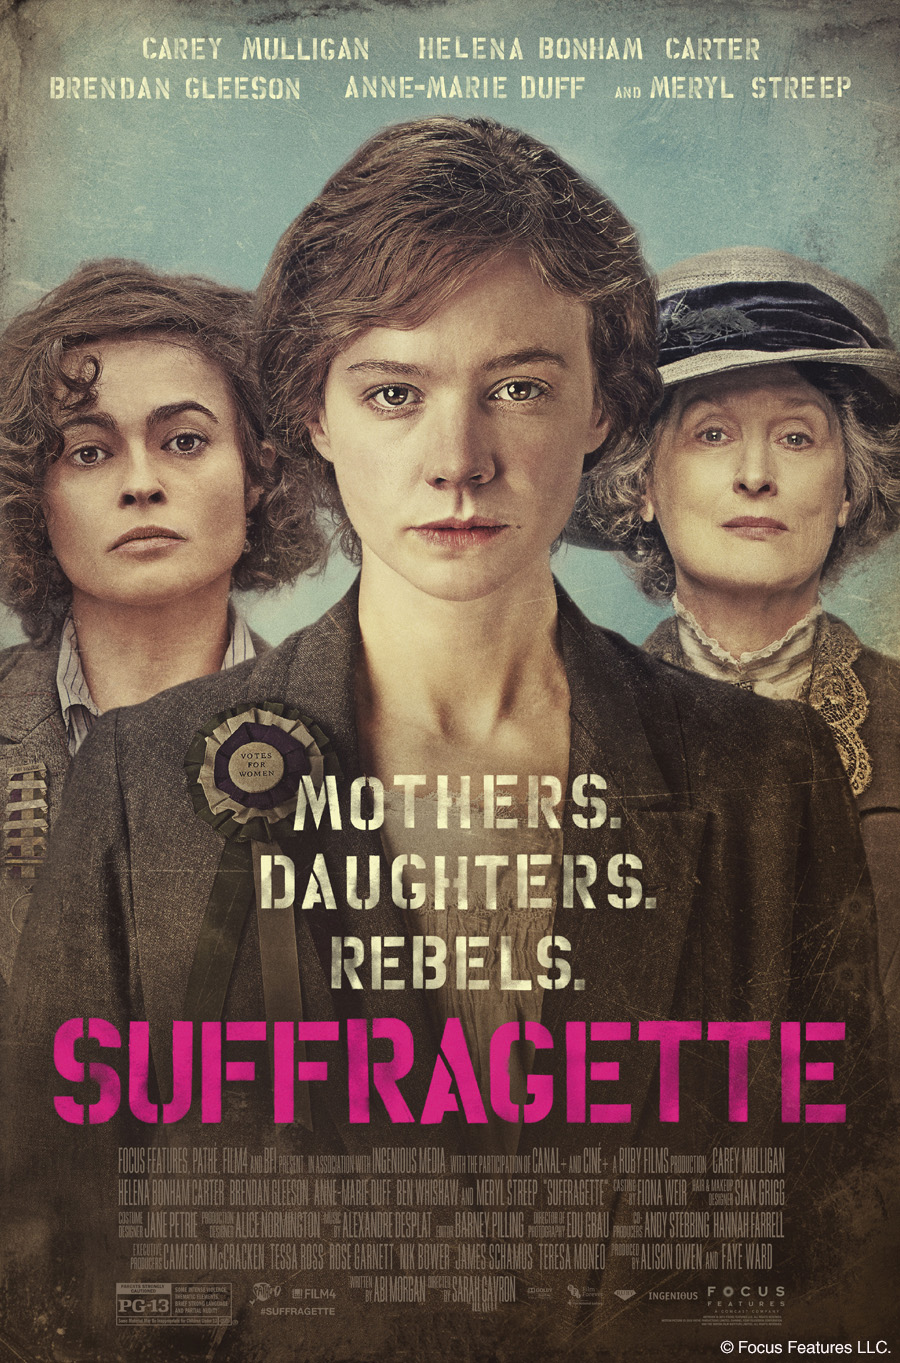 Three women in early 20th-century dress. Movie poster for Suffragette (c) Focus Features LLC